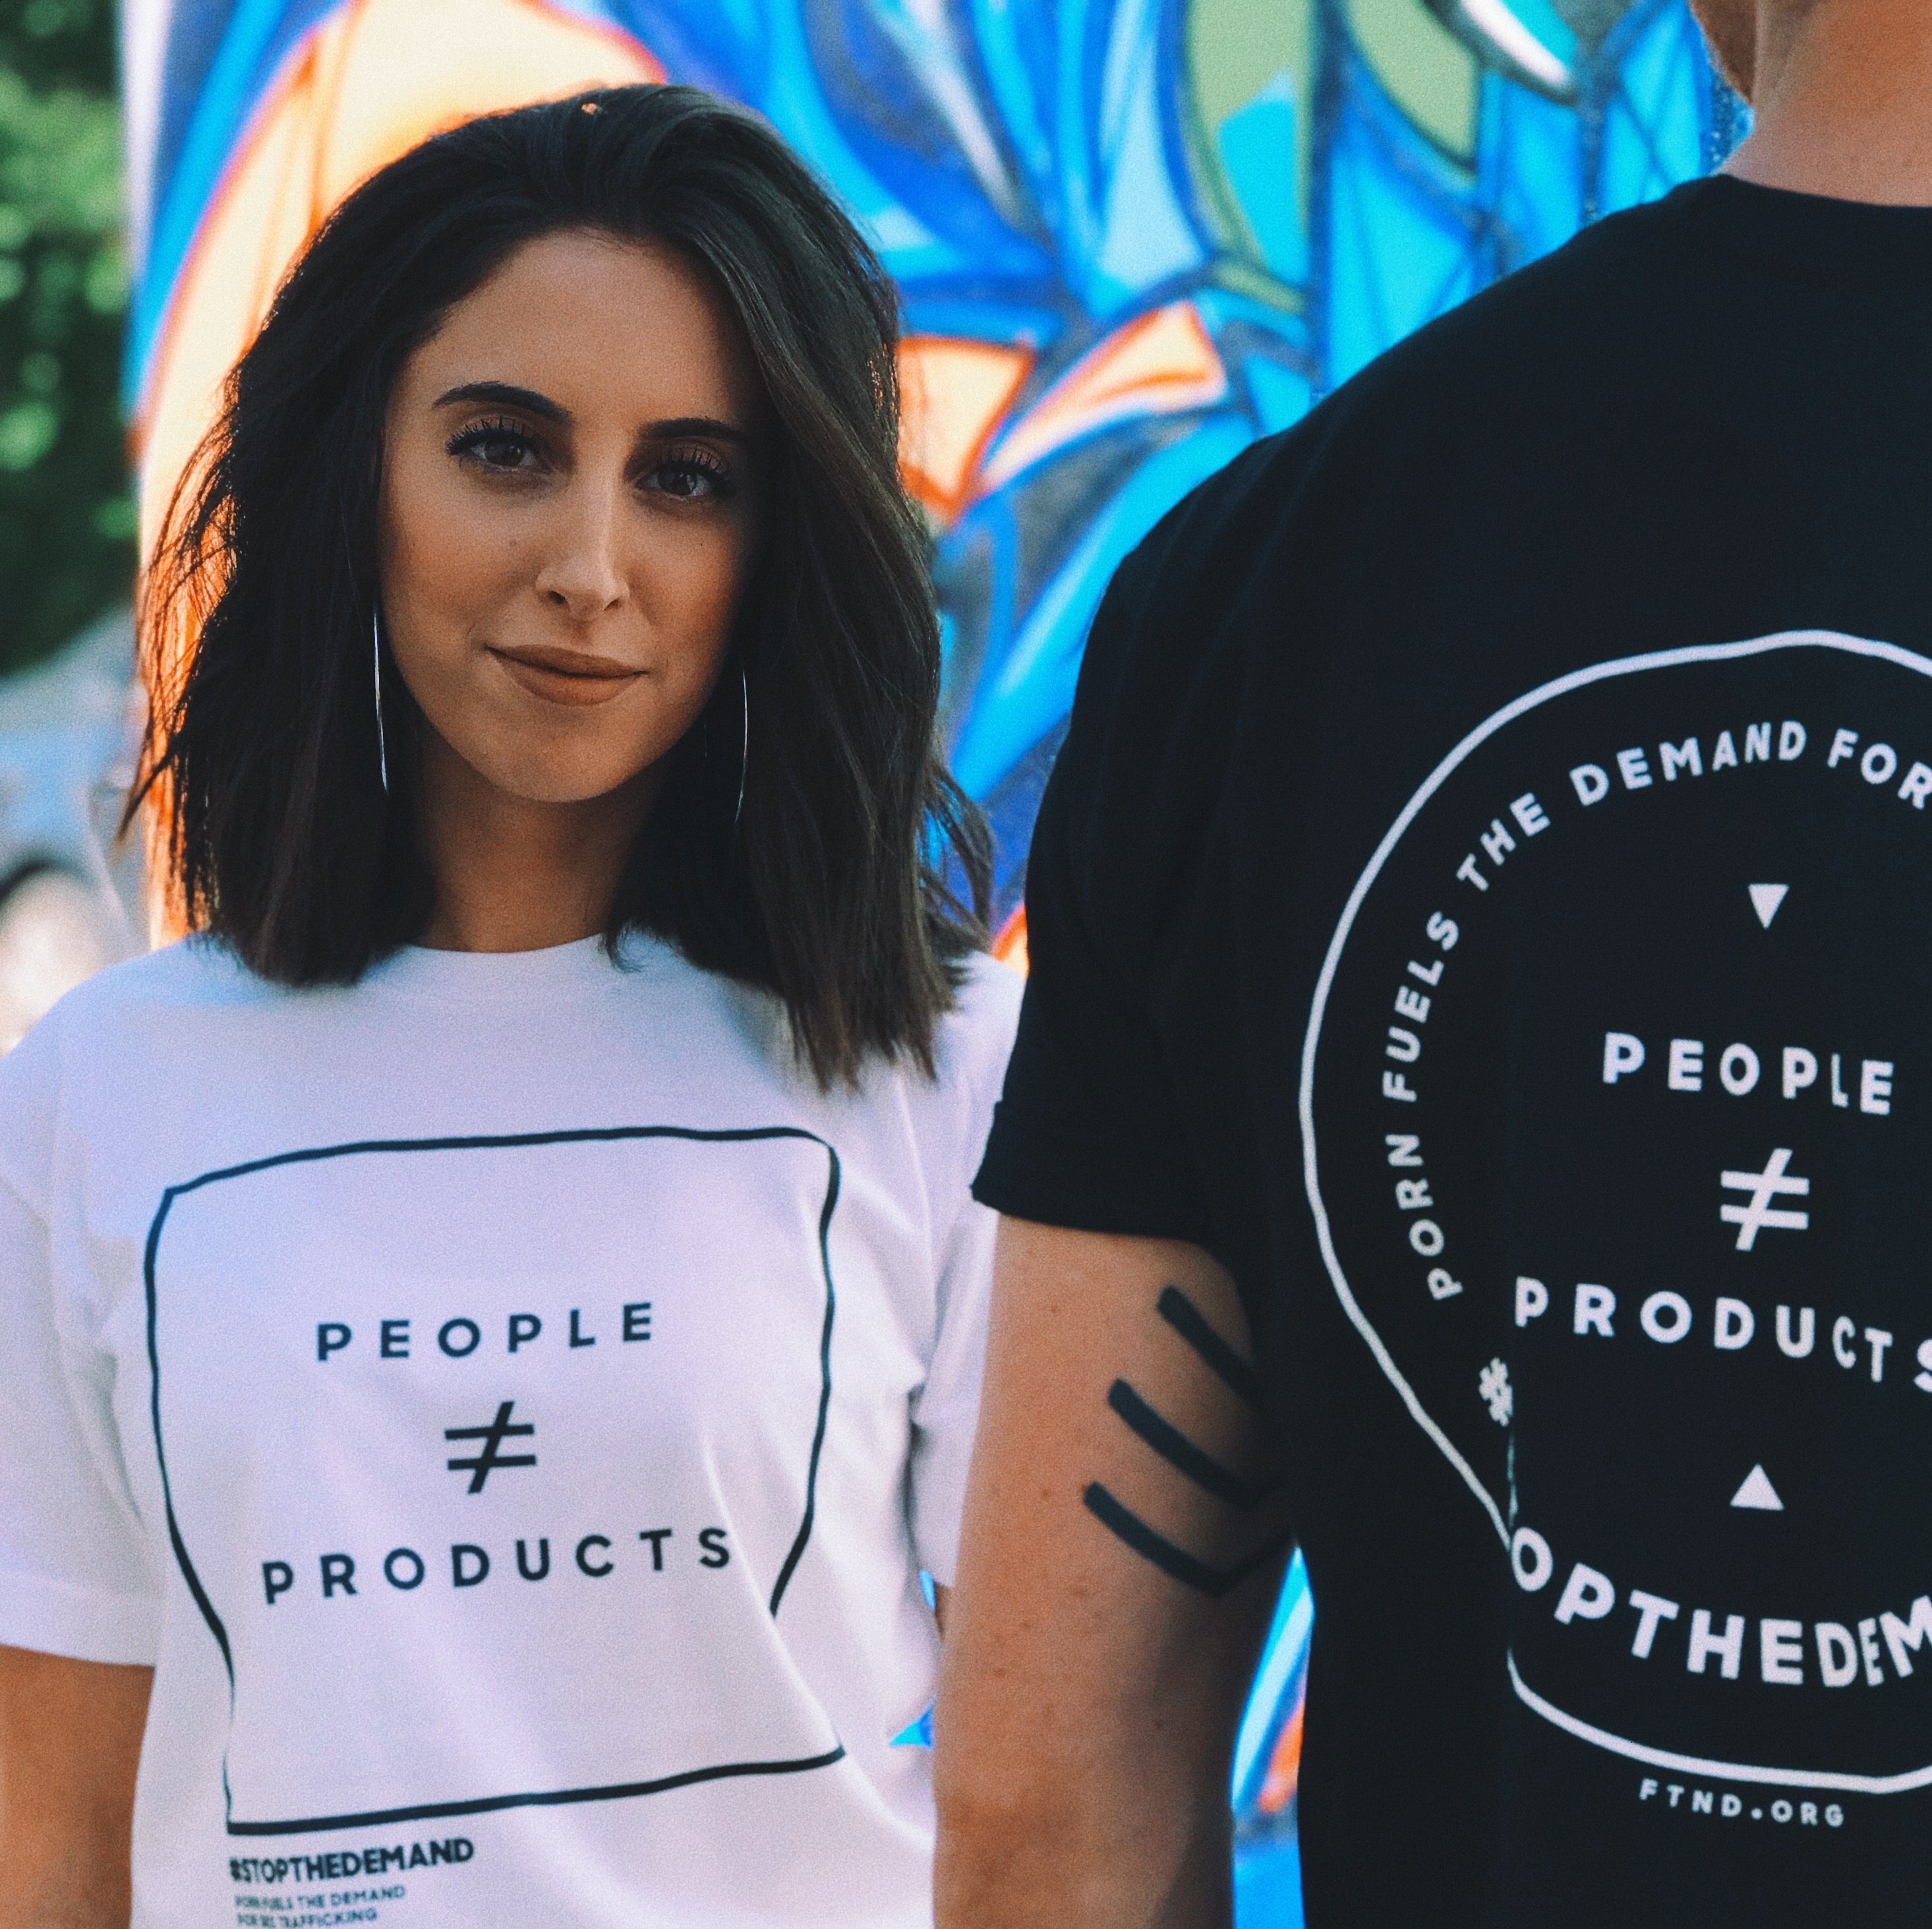 People ≠ Products Slouchy